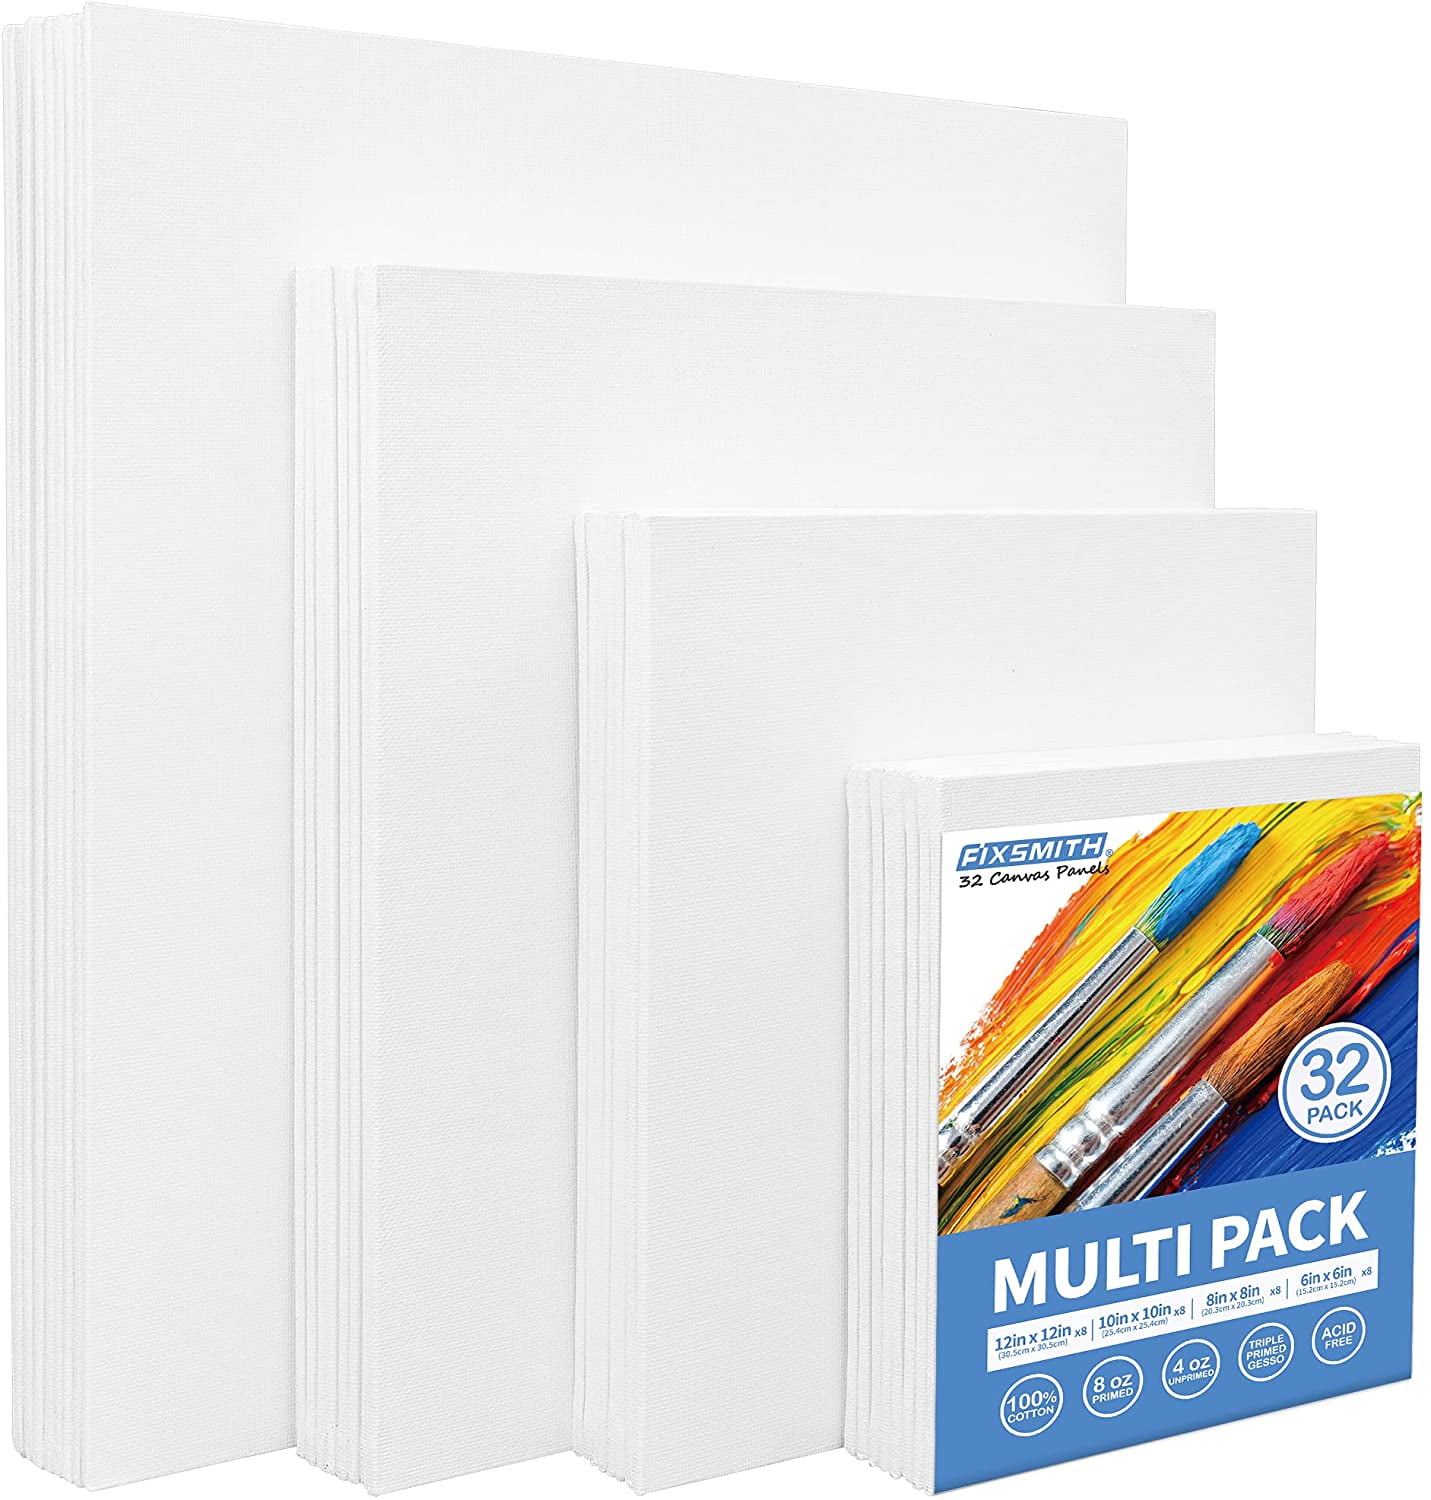 ESRICH Canvases for Painting 8Pack Canvas Panels with 8x10,5x7,4x4（2 of  Each） and 11x14,9x12（1 of Each）,Painting Canvas for Acrylic Paint,Oil